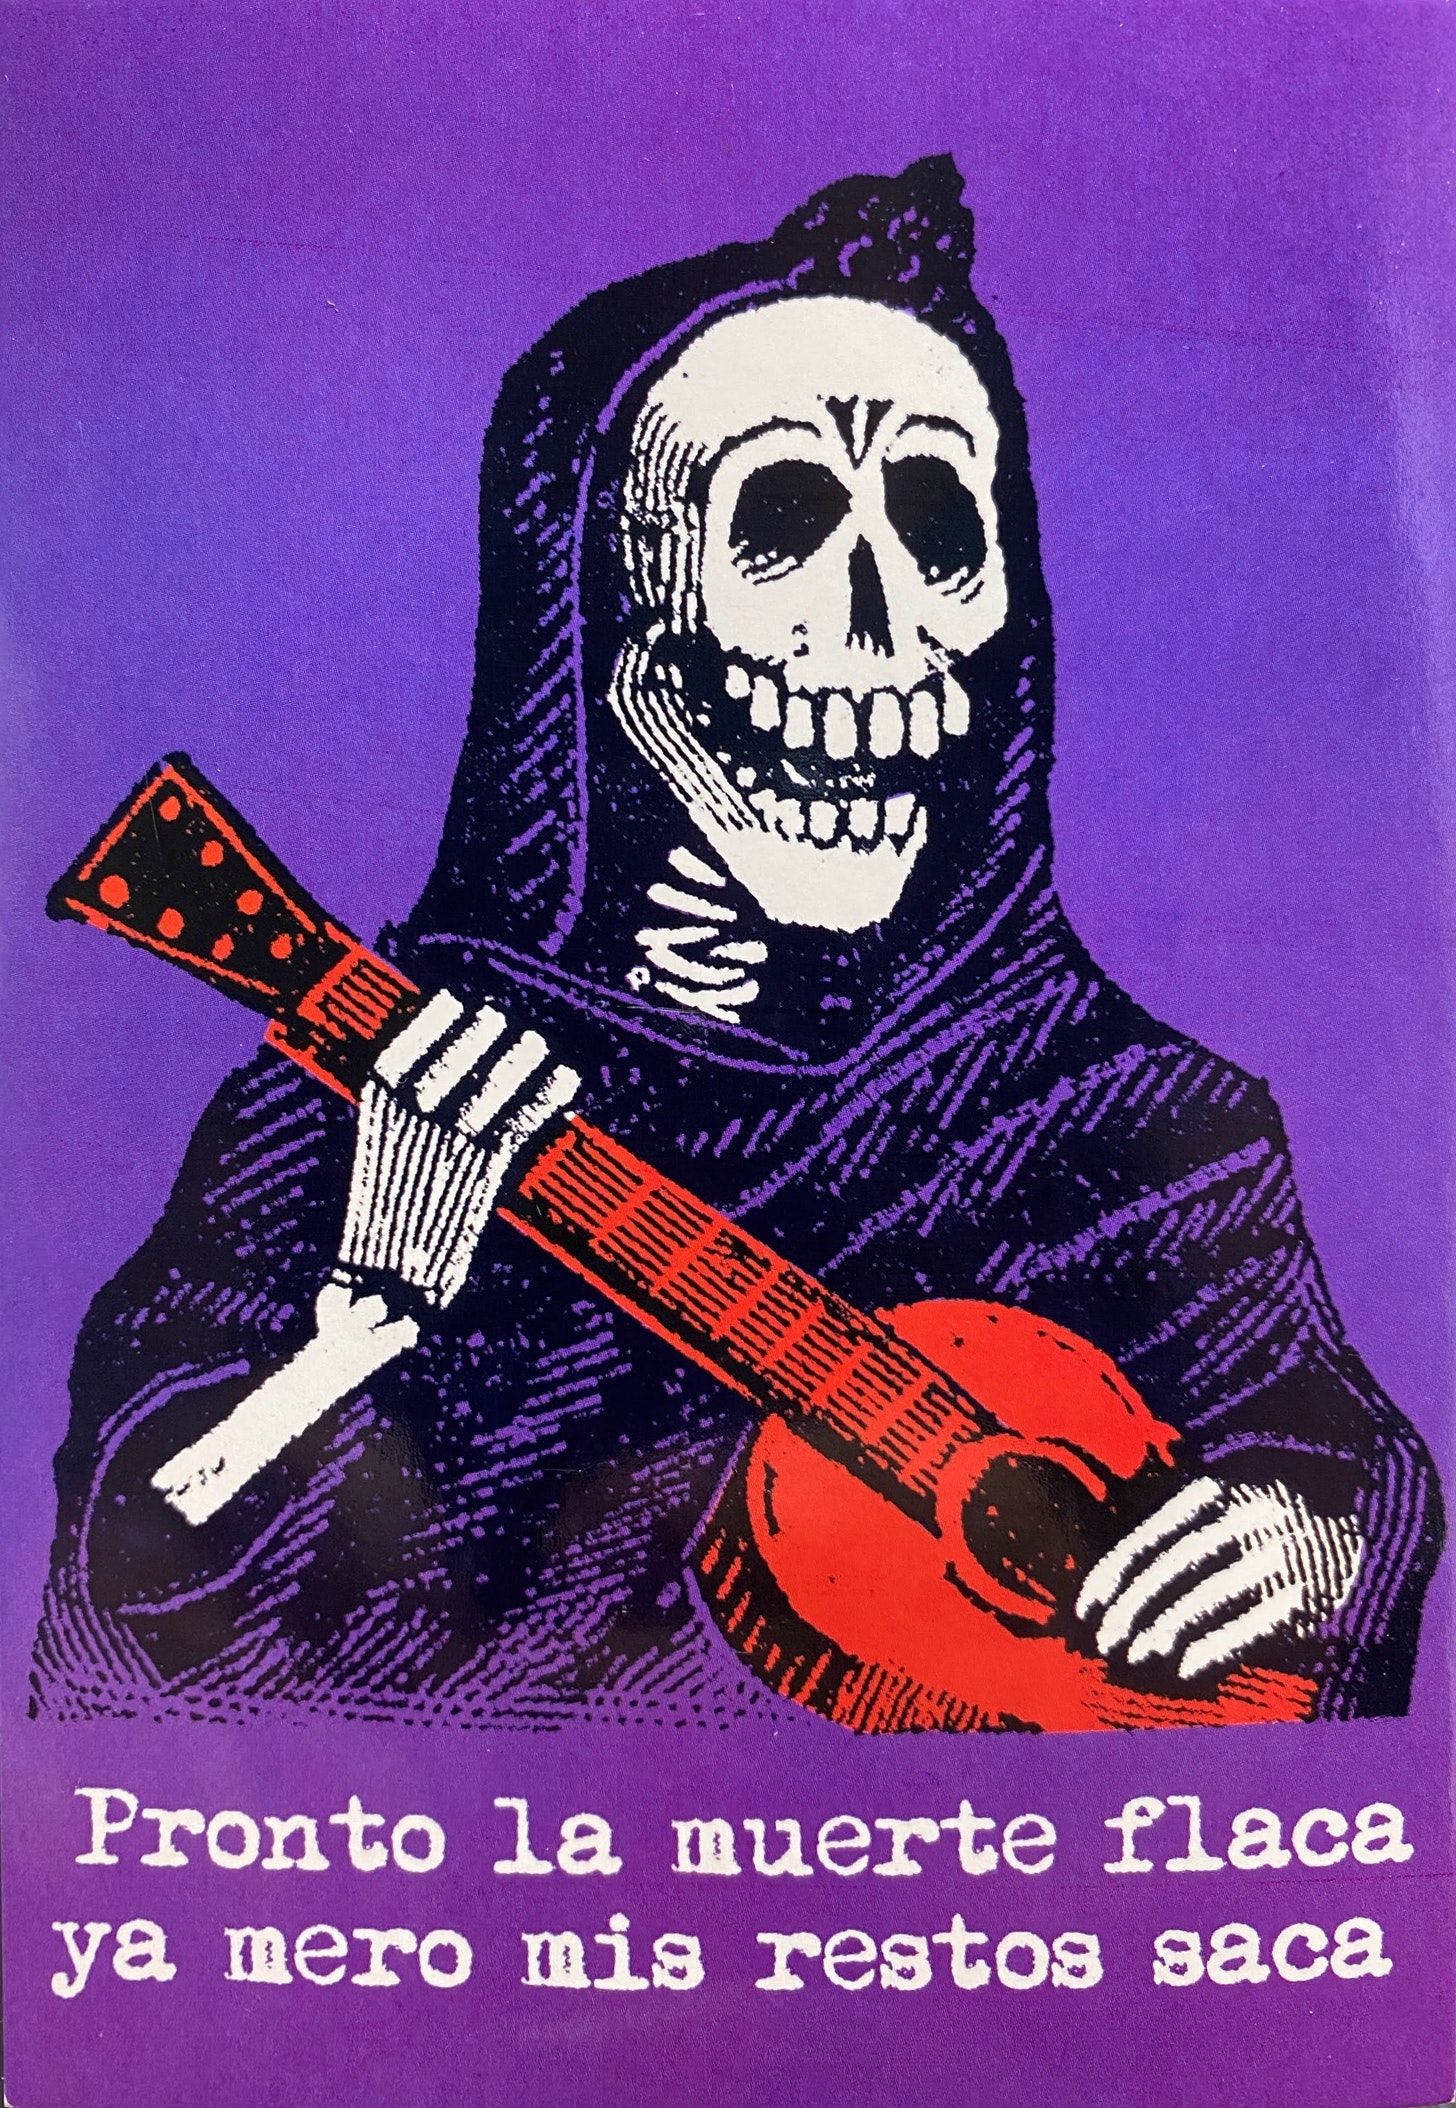 Portrait of a skeleton wearing a sarape over their cranium and body, while holding a red guitar.